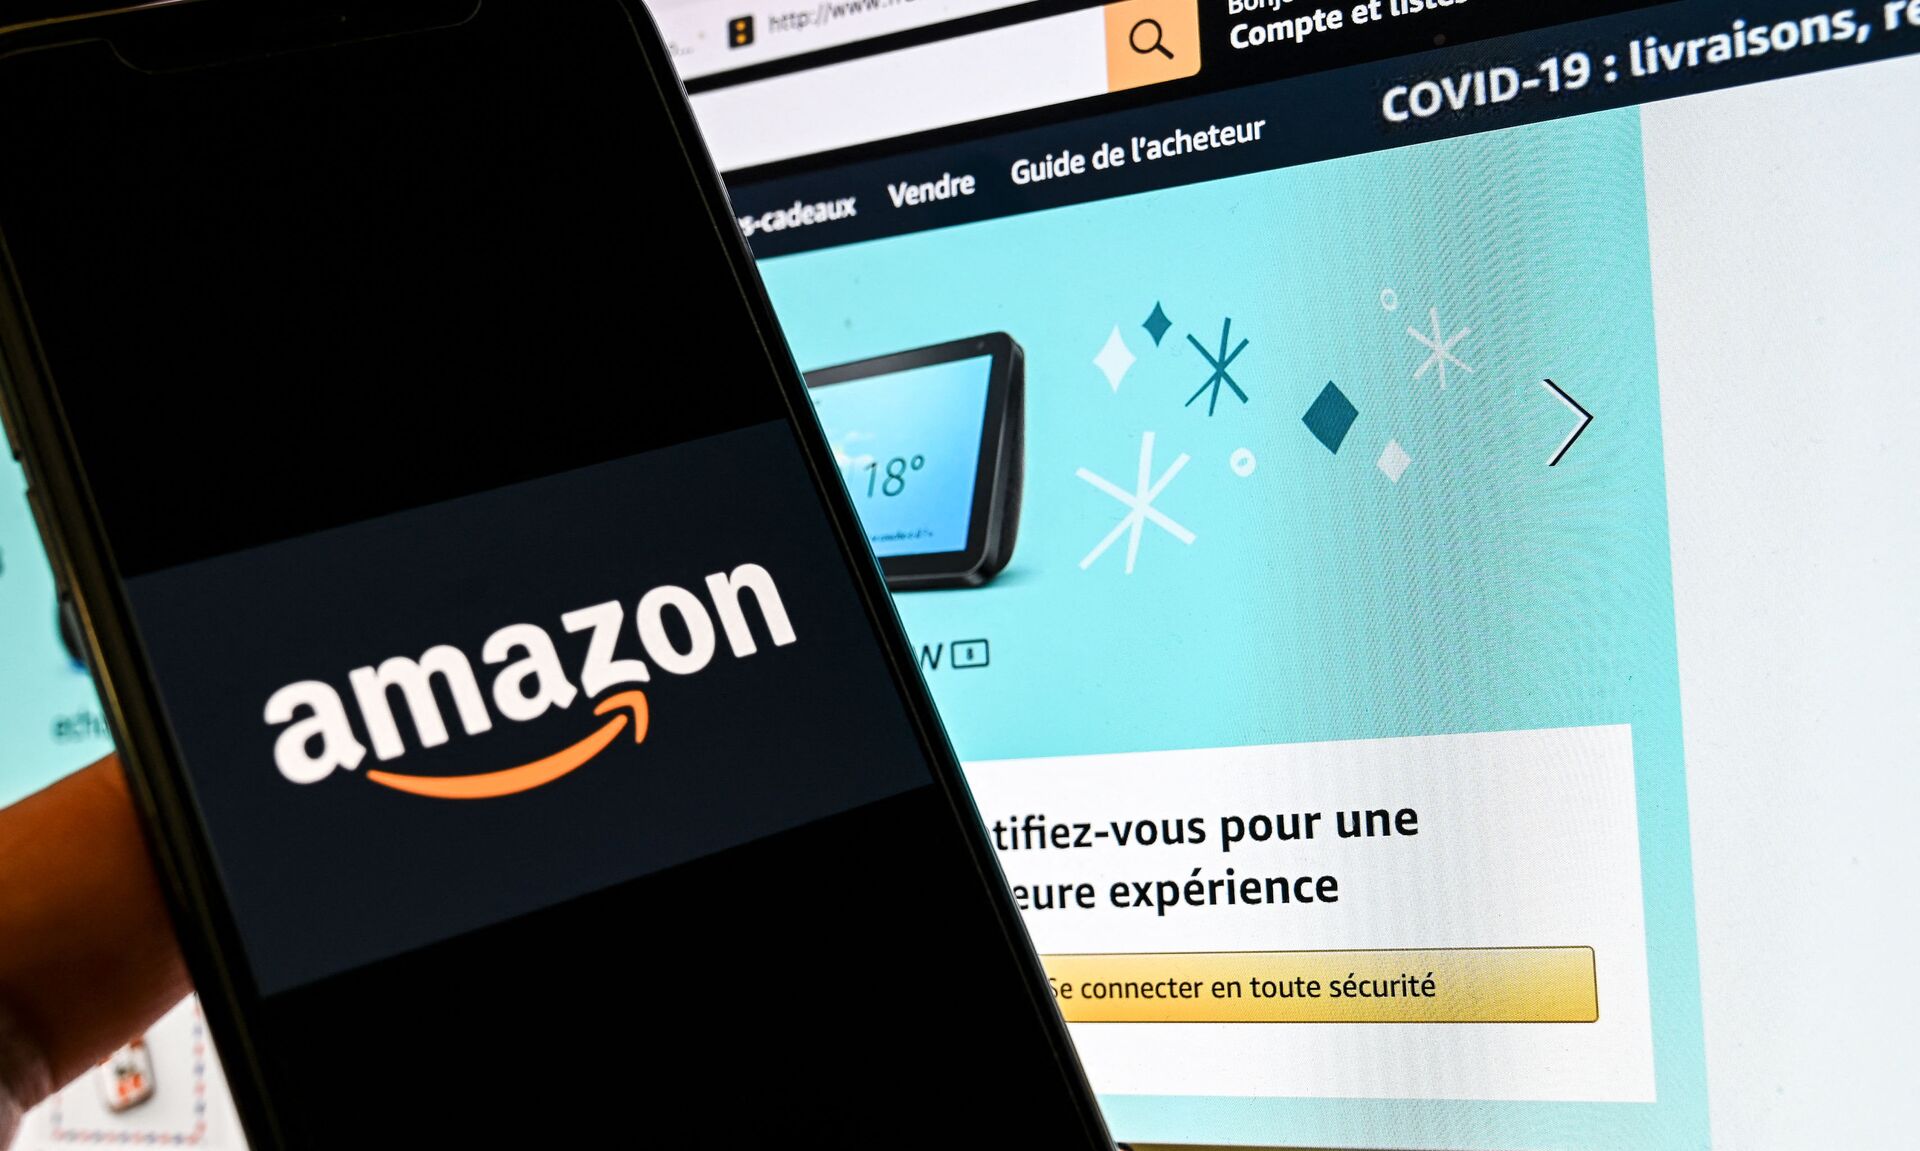 In this photograph taken on November 18, 2020 in Lille, a person poses with a smartphone showing an Amazon logo, in front of a computer screen displaying the home page of Amazon France sales website. - Sputnik International, 1920, 03.12.2021